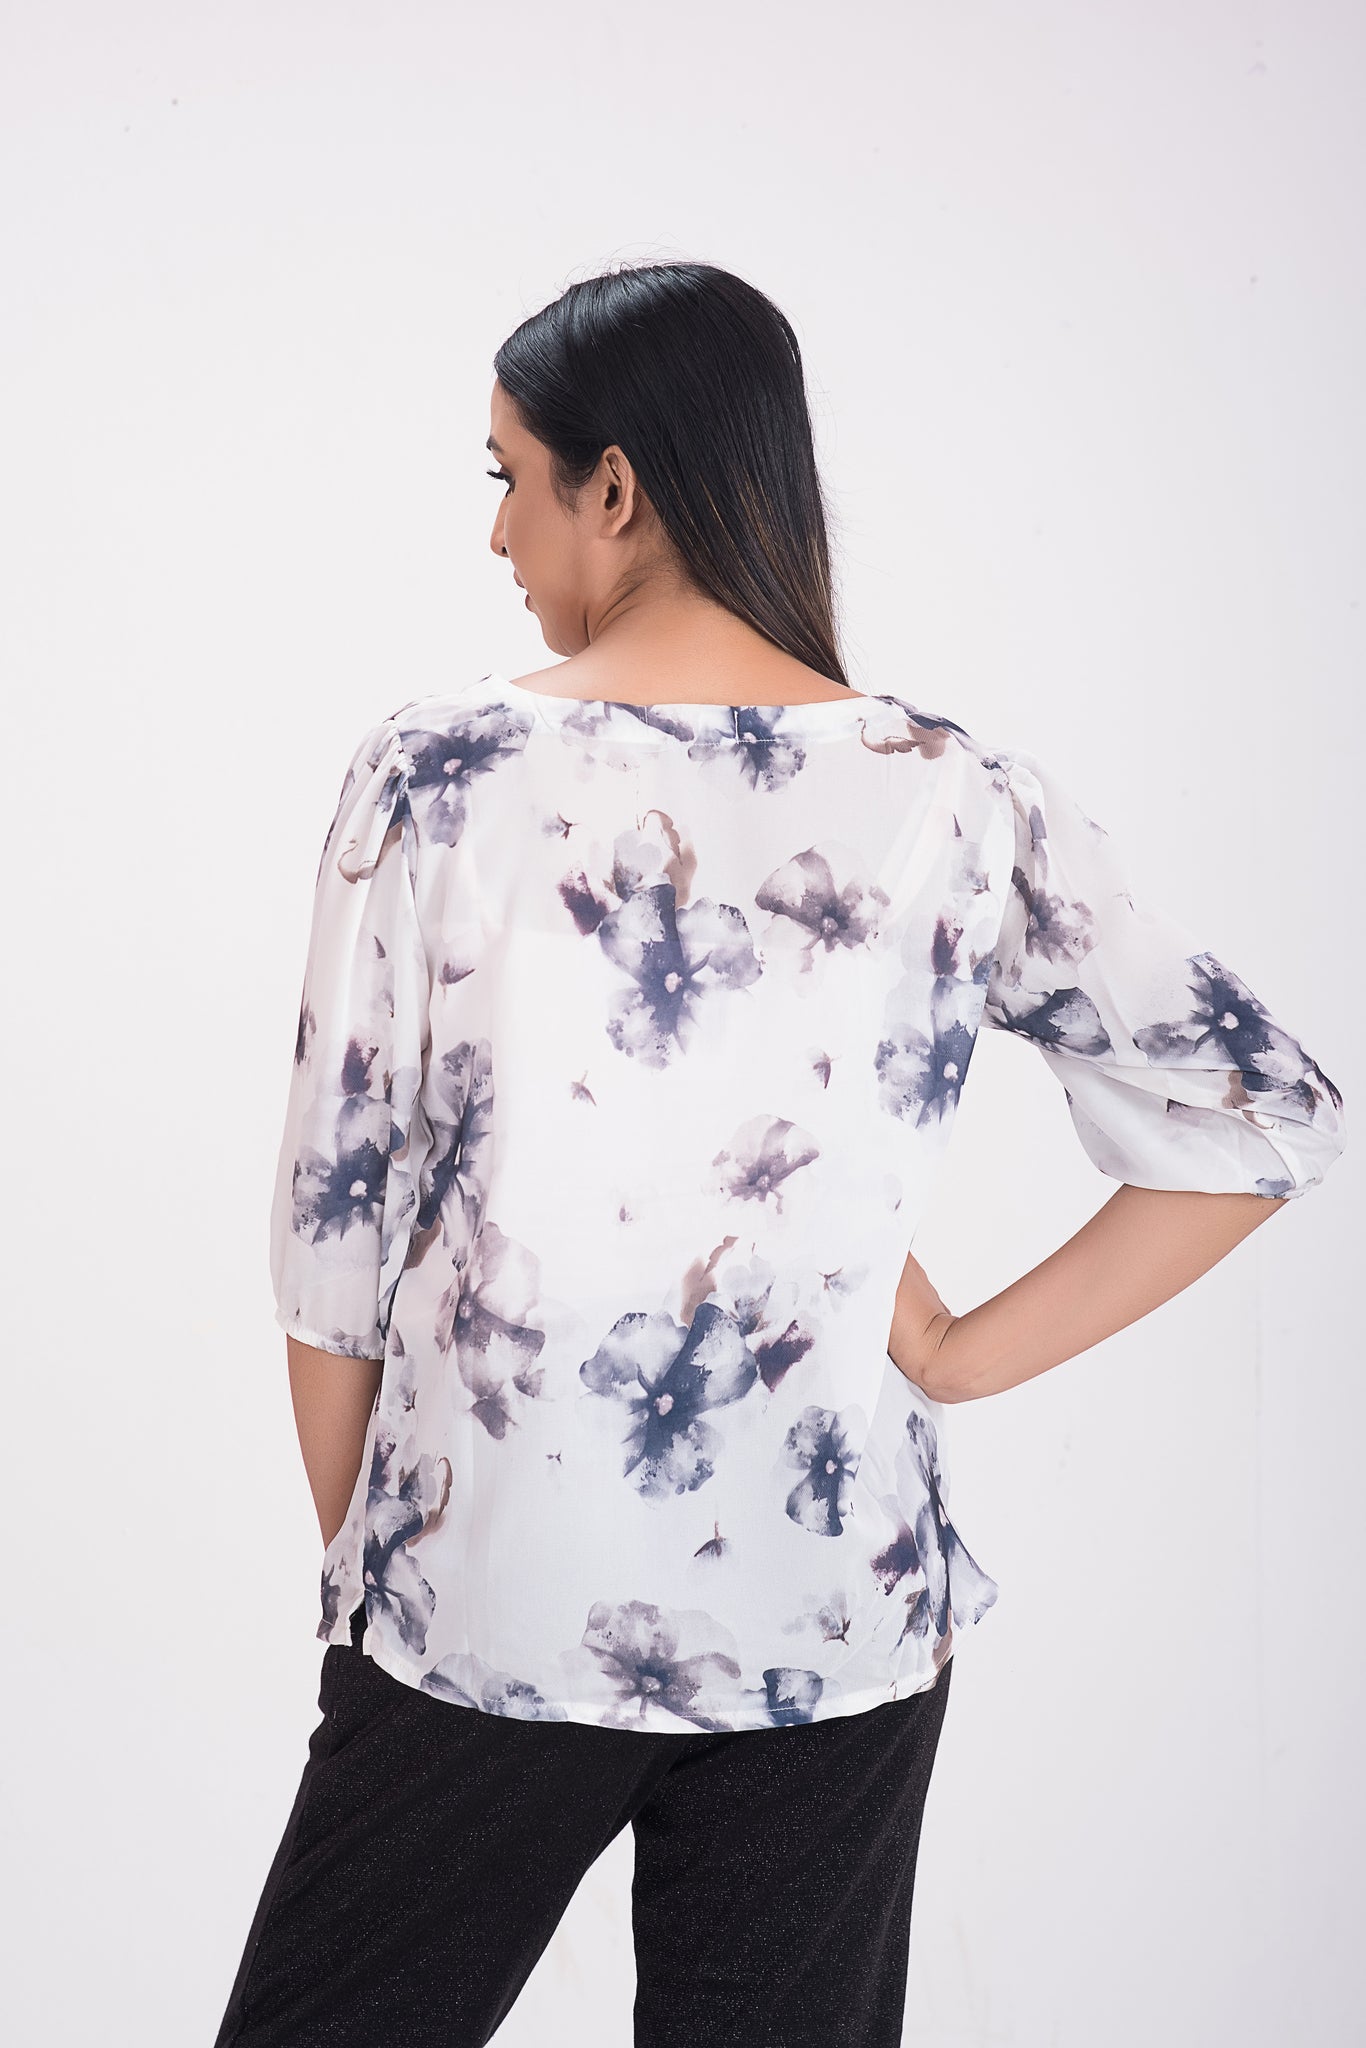 Casual Floral Print Women White Tops - Eternce